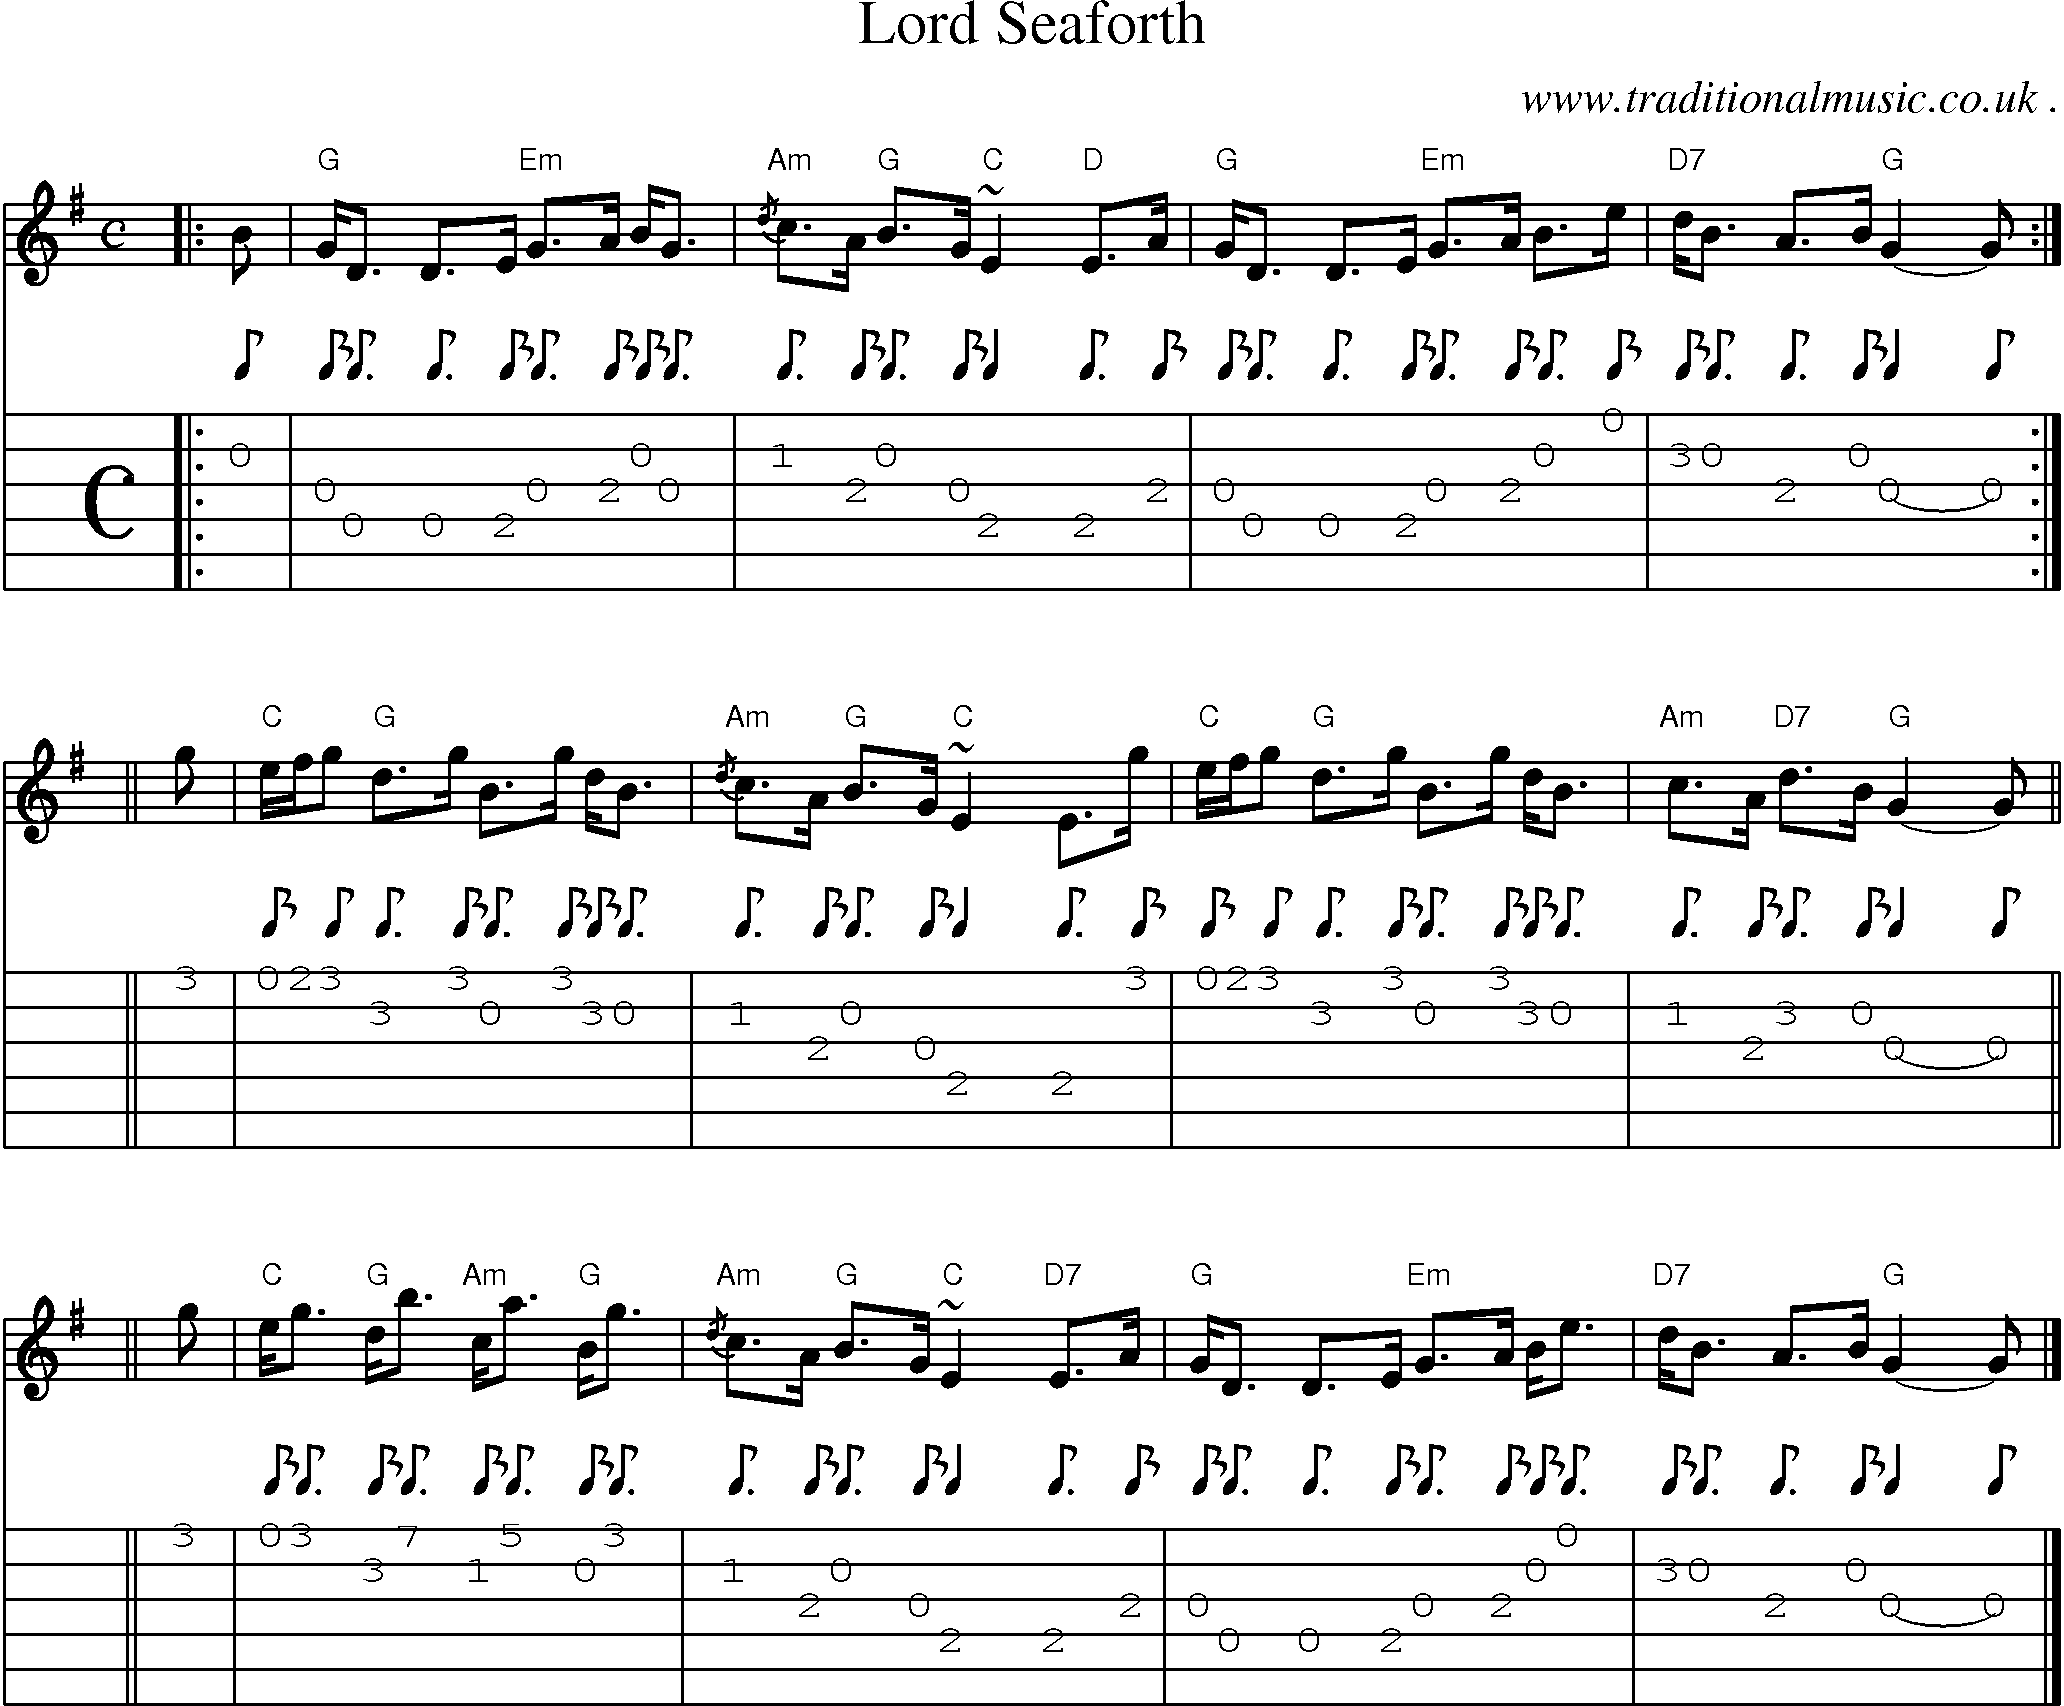 Sheet-music  score, Chords and Guitar Tabs for Lord Seaforth